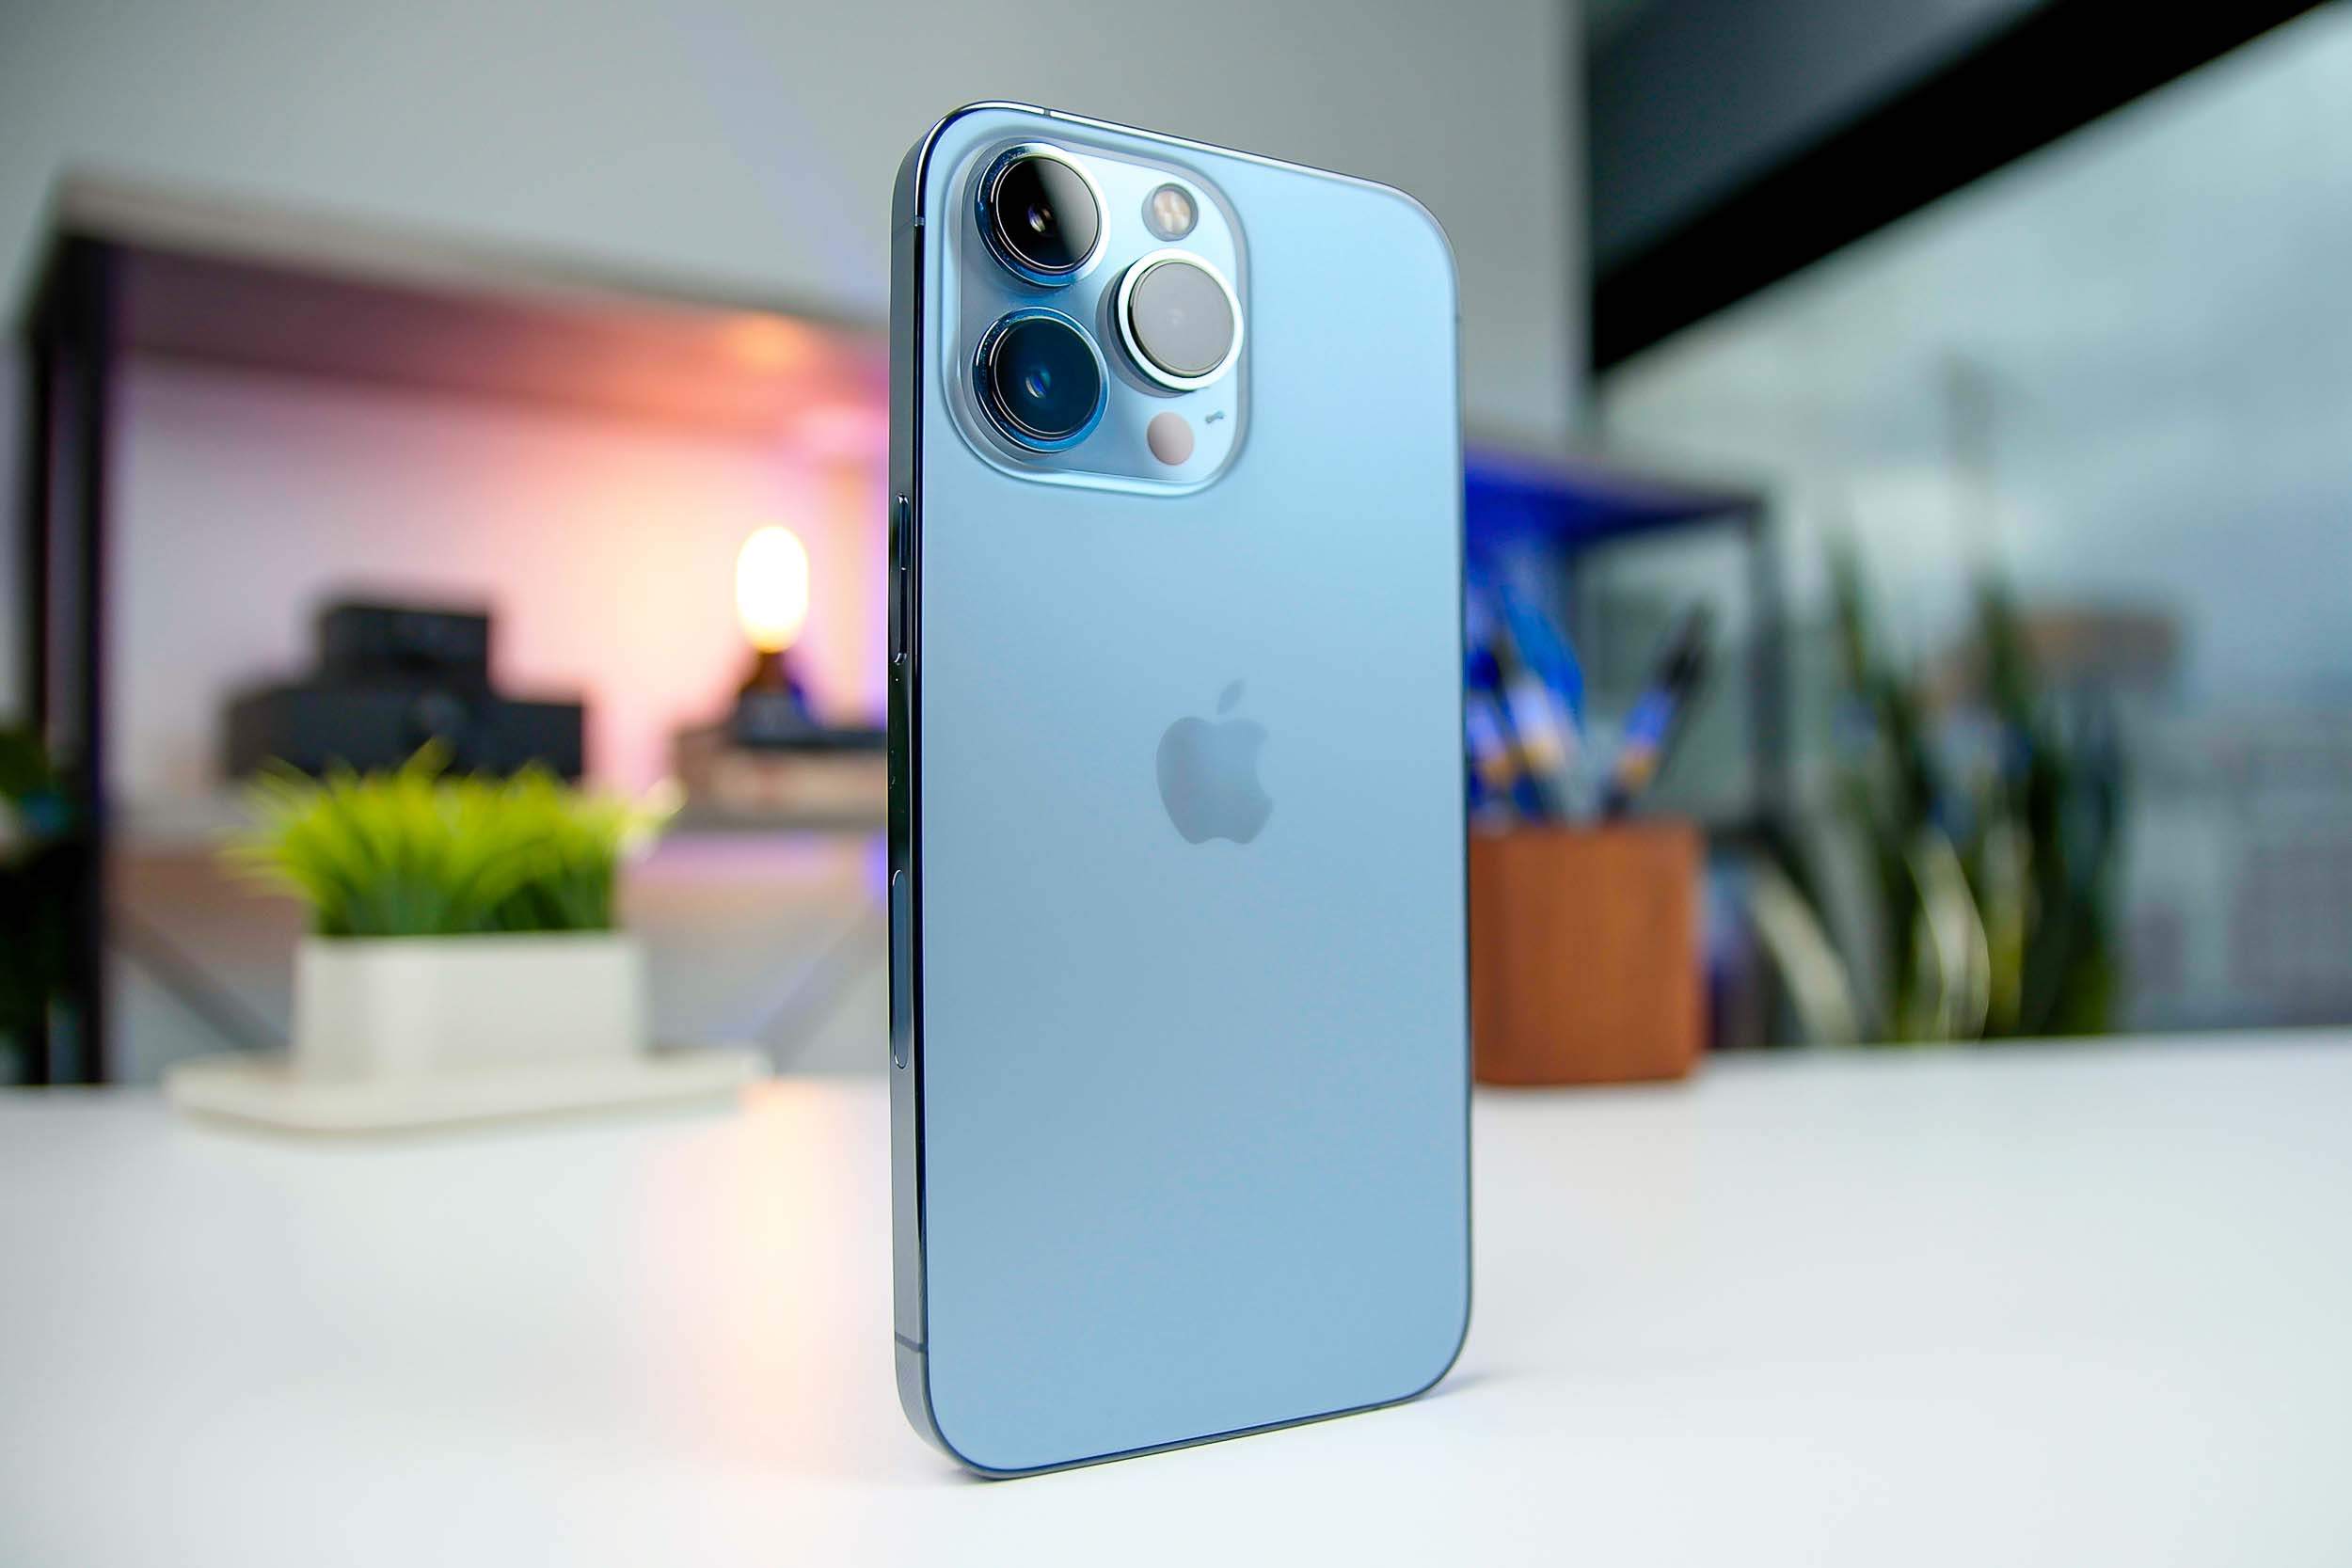 iPhone 13 and 13 Pro review: If you could have three wishes